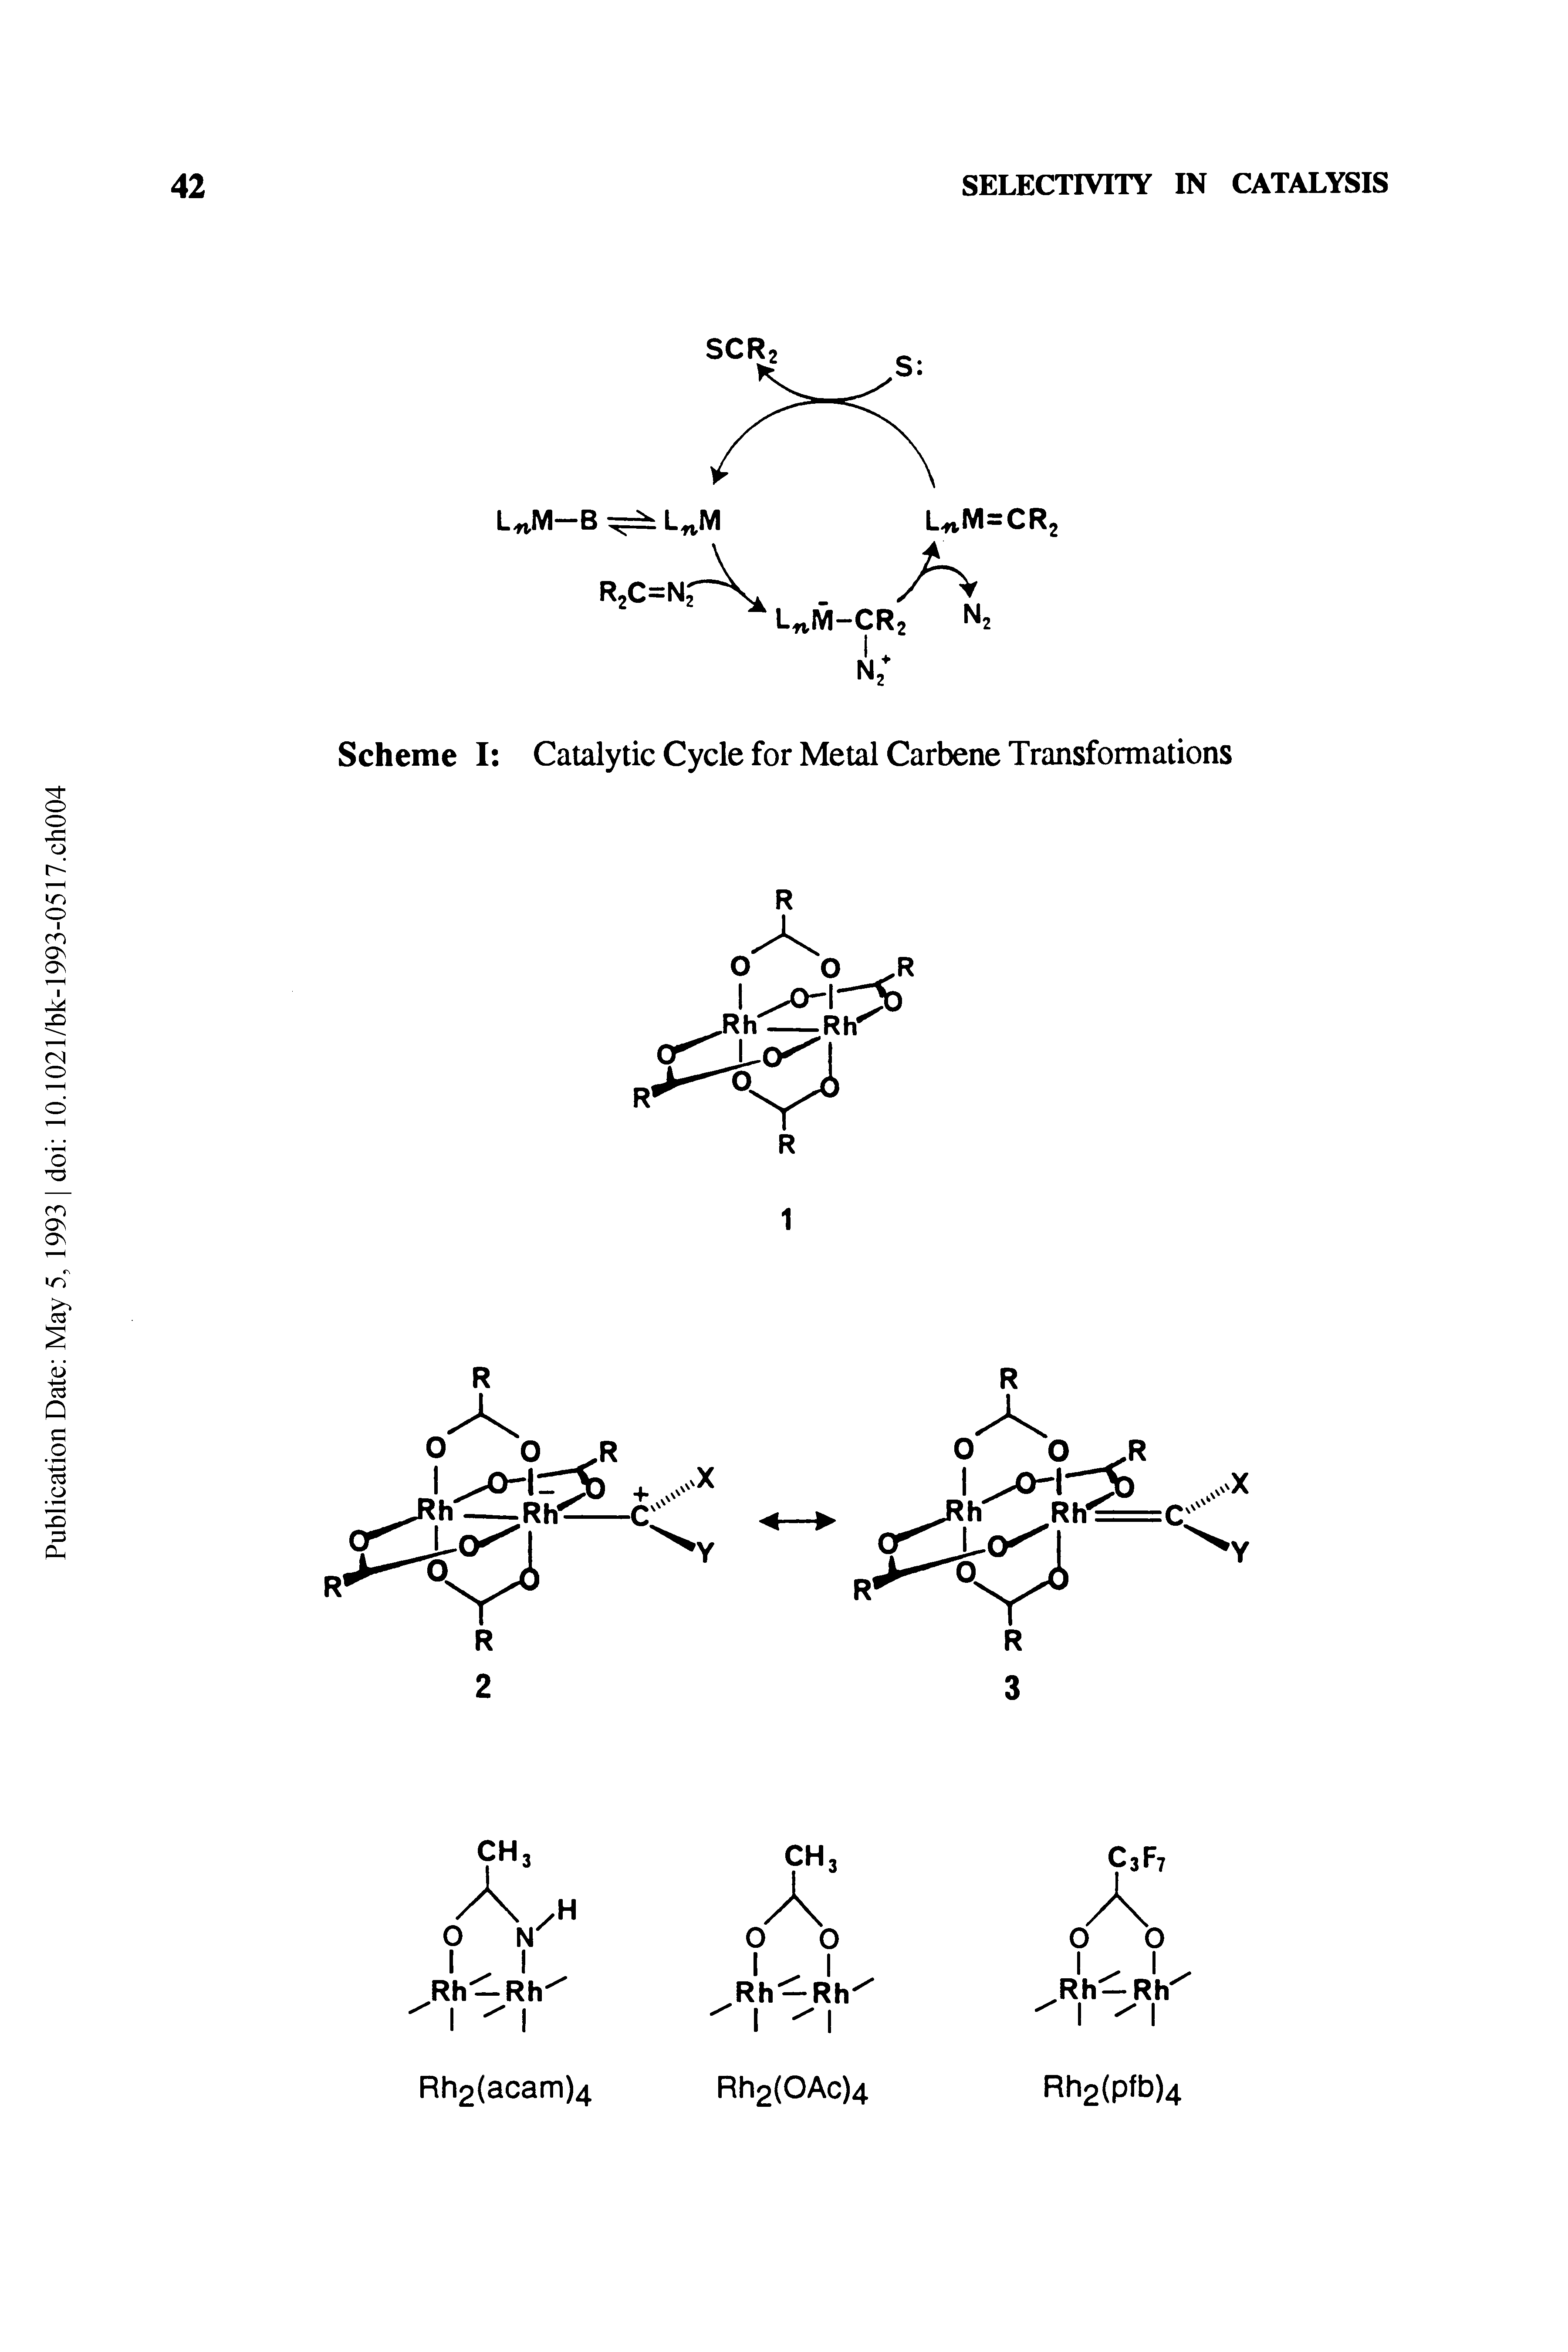 Scheme I Catalytic Cycle for Metal Carbene Transformations...